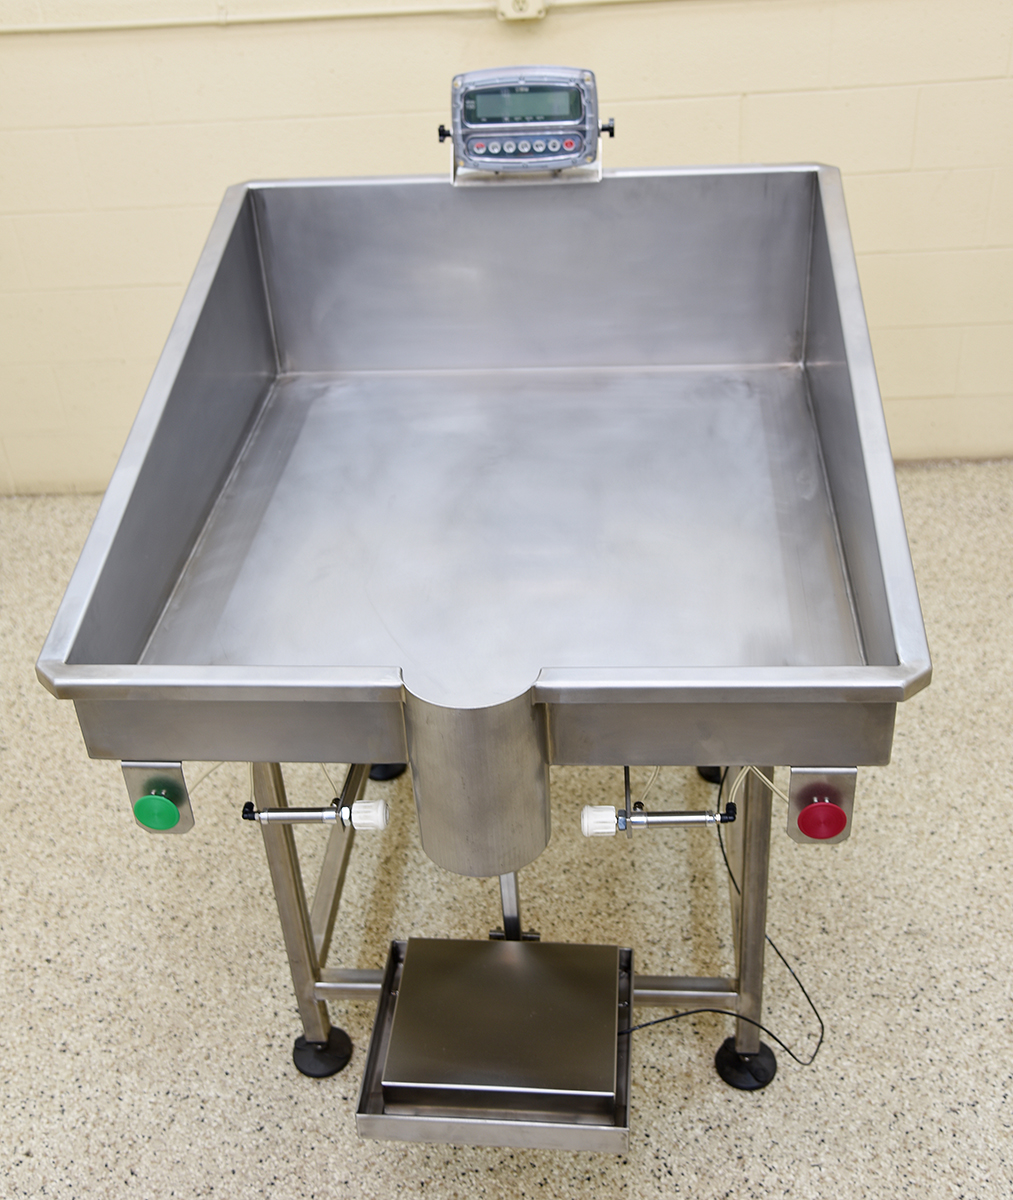 PACK TABLE / BAG FILLER TABLE, with scale and holder, food grade stainless steel, Alard item Y0500